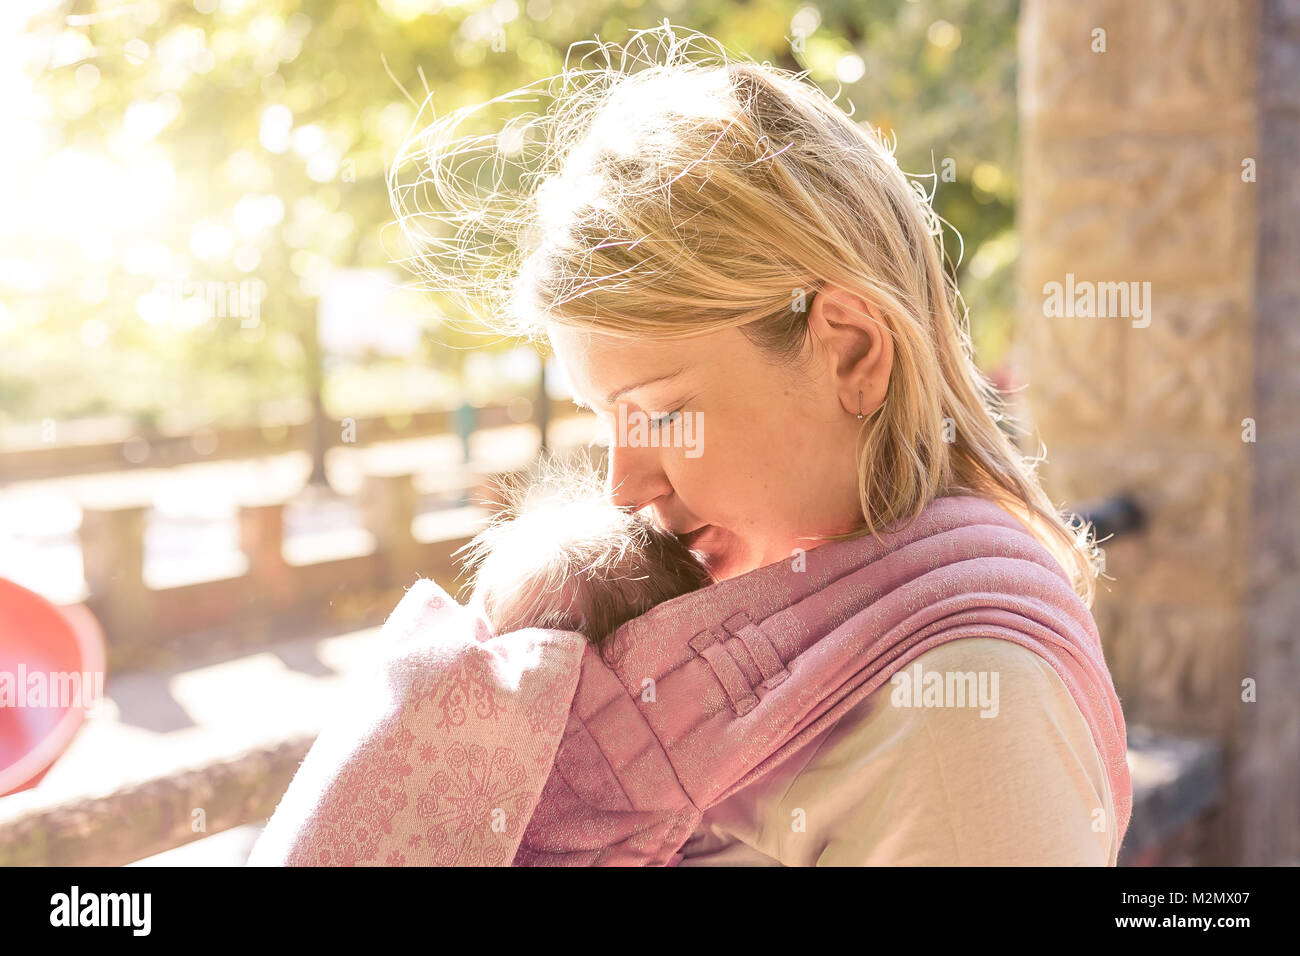 Beautiful Young mother carrying a newborn baby in a pink shawl sling in a sunny day- Concept Young Mothers. Stock Photo